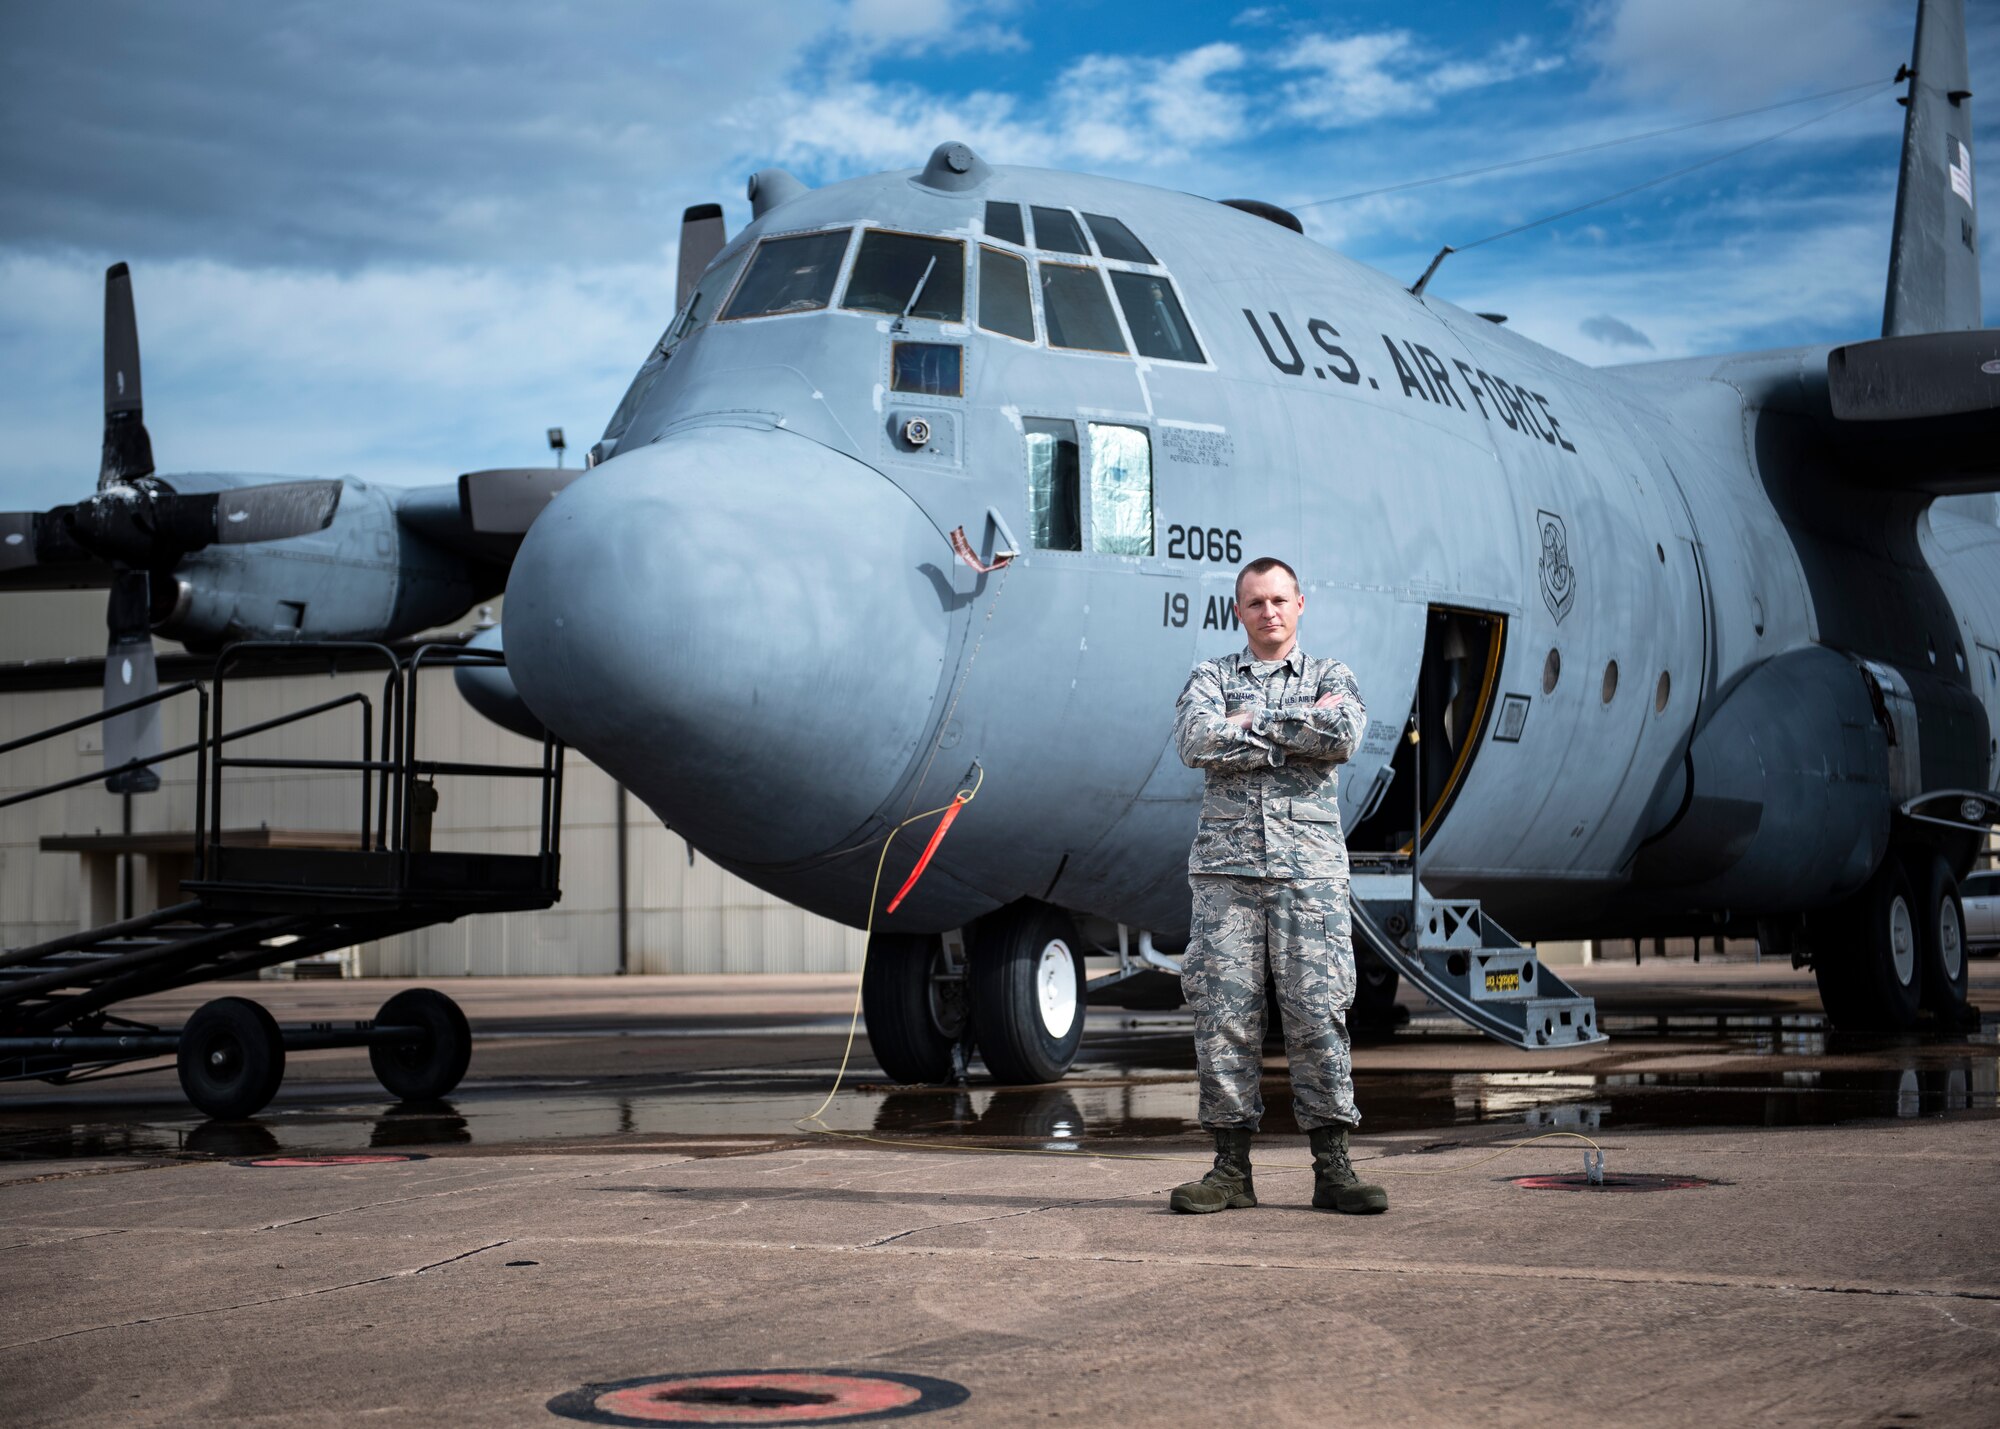 Staff Sgt. Aaron Williams, 365th Training Squadron mobility air force integrated communication, countermeasure and navigation systems apprentice course student, poses for a picture at Sheppard Air Force Base, Texas, June 6, 2019. Williams became the first student to receive the ACE award for the combined com/nav and electronic warfare course after receiving a 100% on all 23 of the block tests and performance checks. (U.S. Air Force photo by Airman 1st Class Pedro Tenorio)